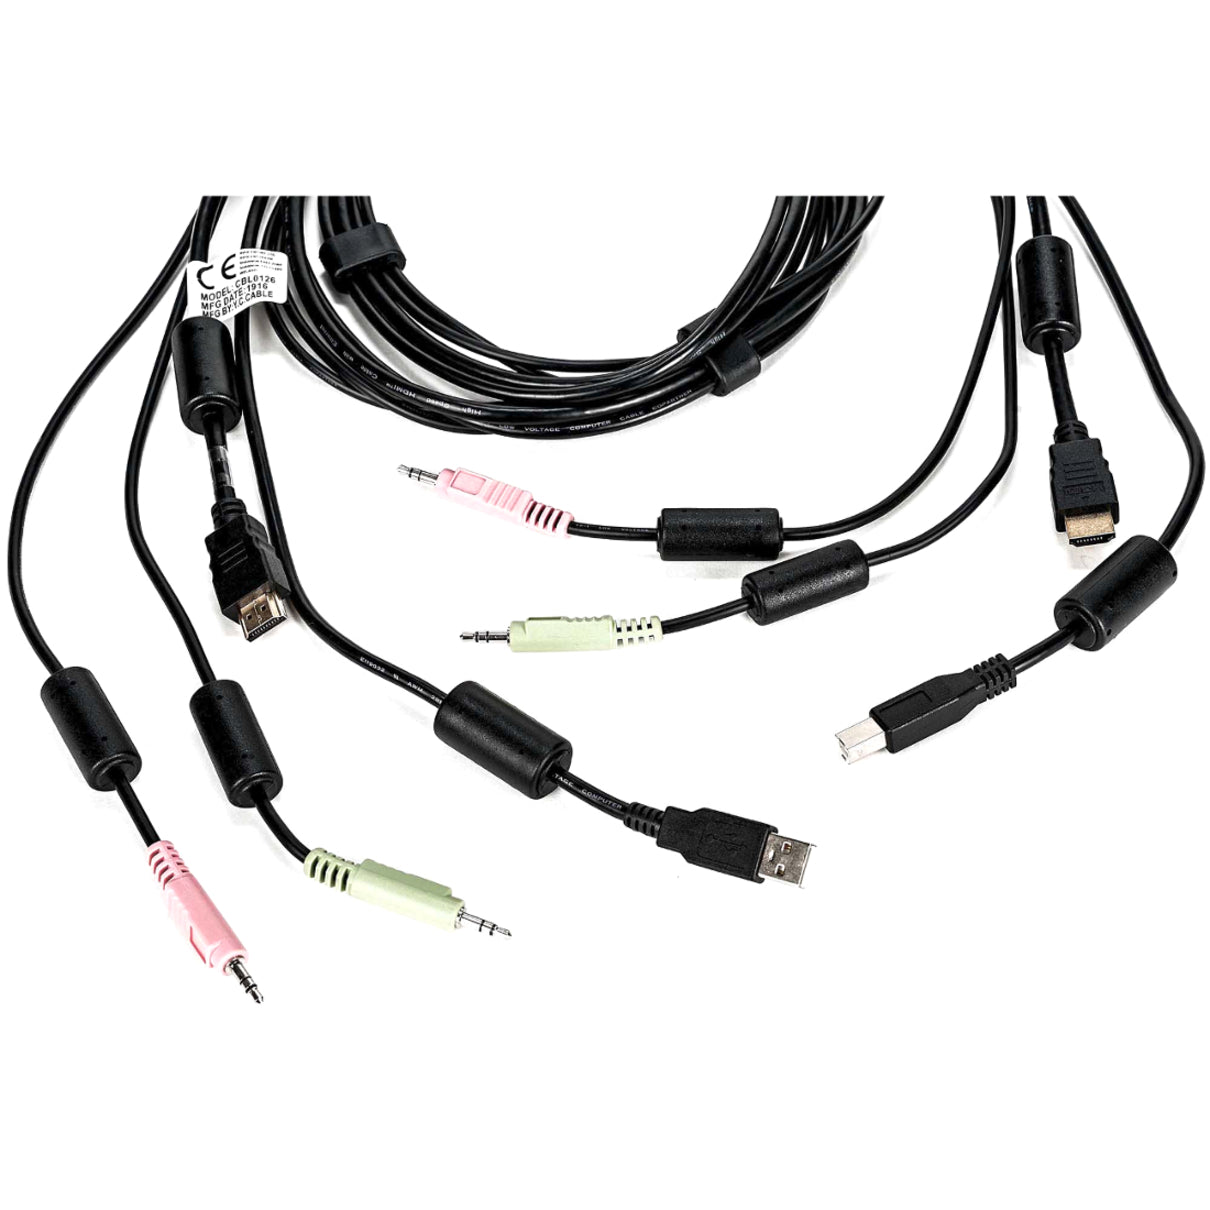 AVOCENT CBL0126 KVM Cable, 6 ft HDMI USB Audio, Compatible with SV220H SV240H